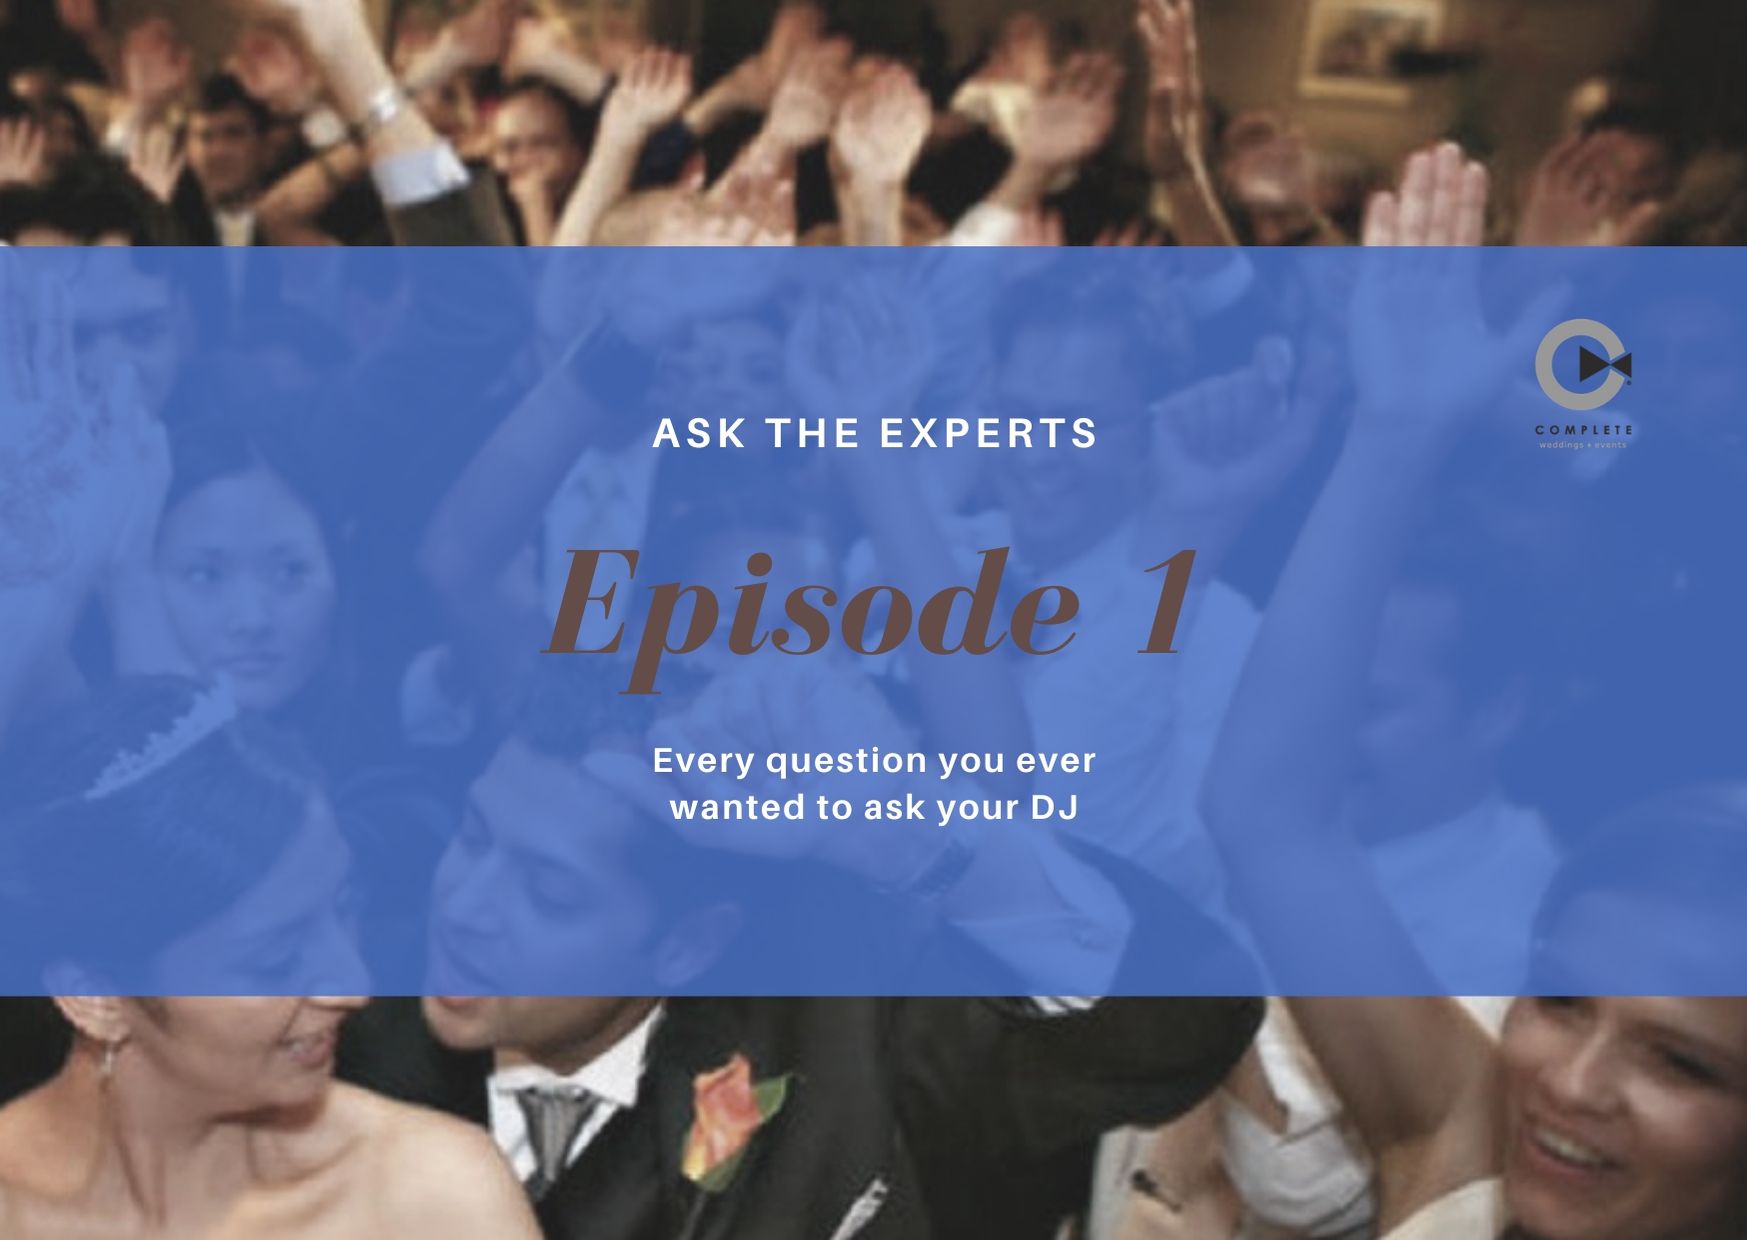 Ask the Experts Episode 1